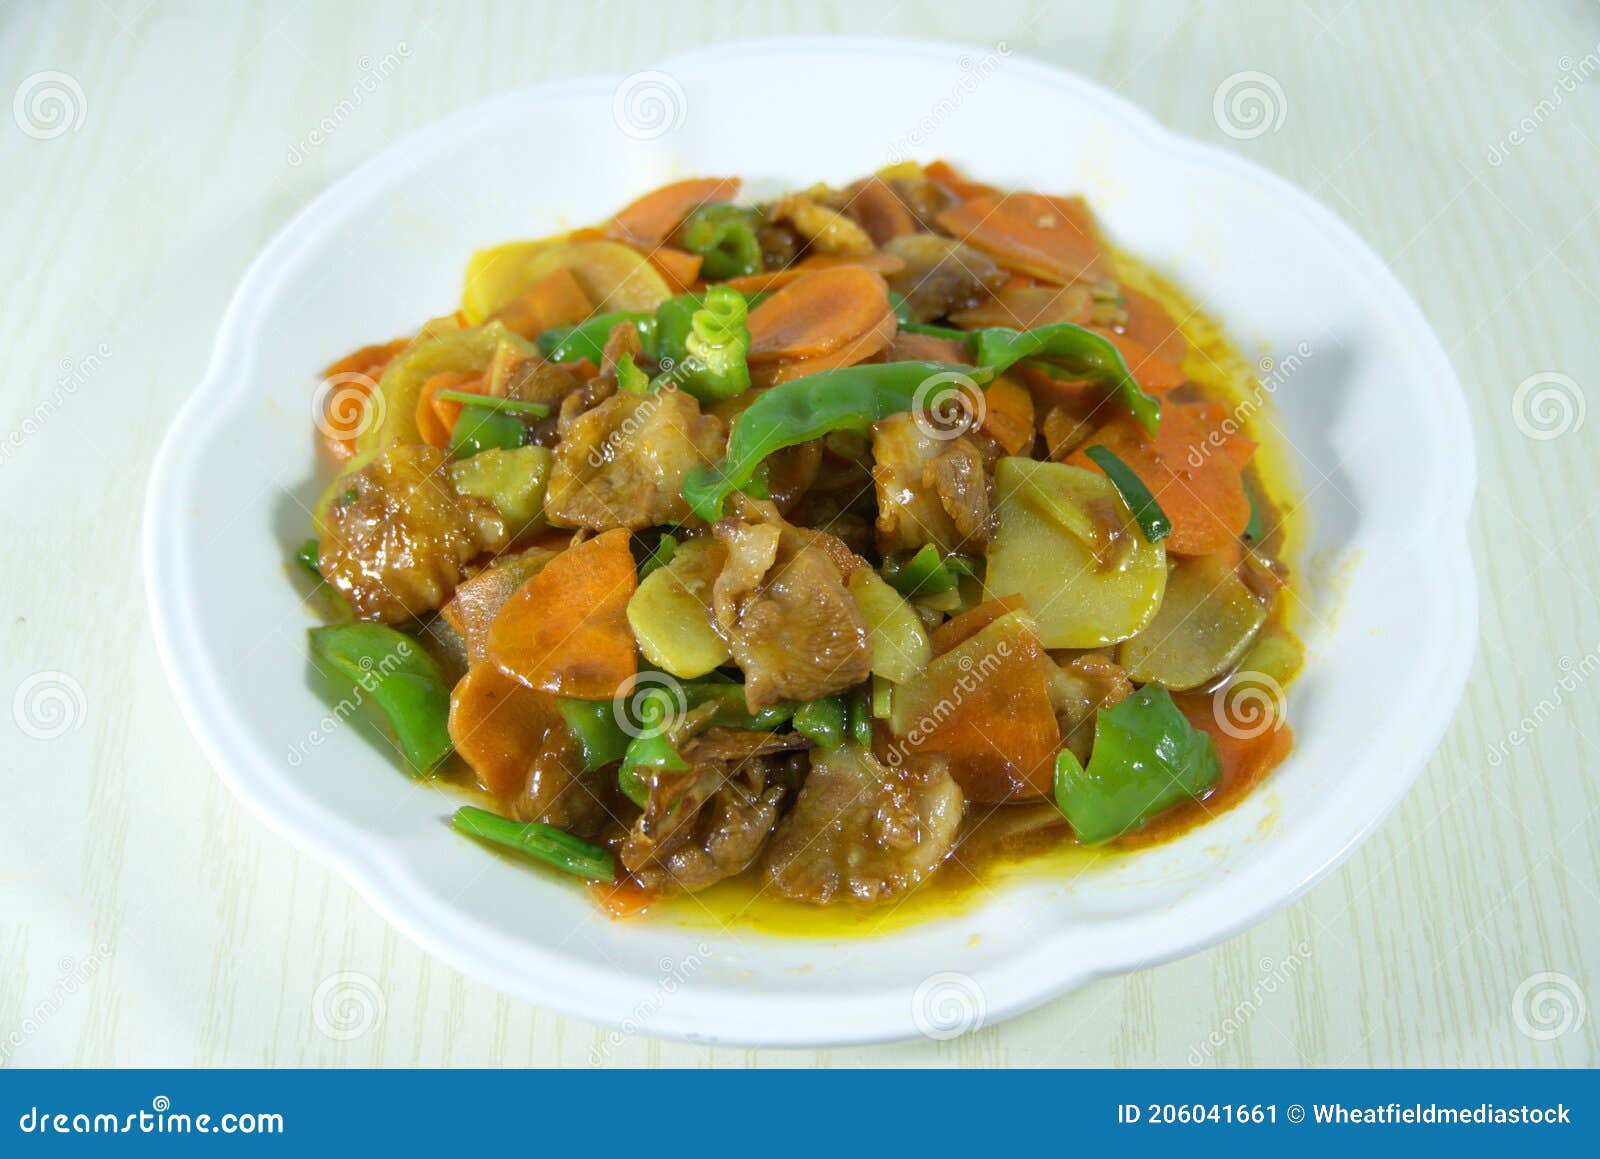 chinese stir-fried fresh meat with carrots, green peppers, potatoes on white plate, top view